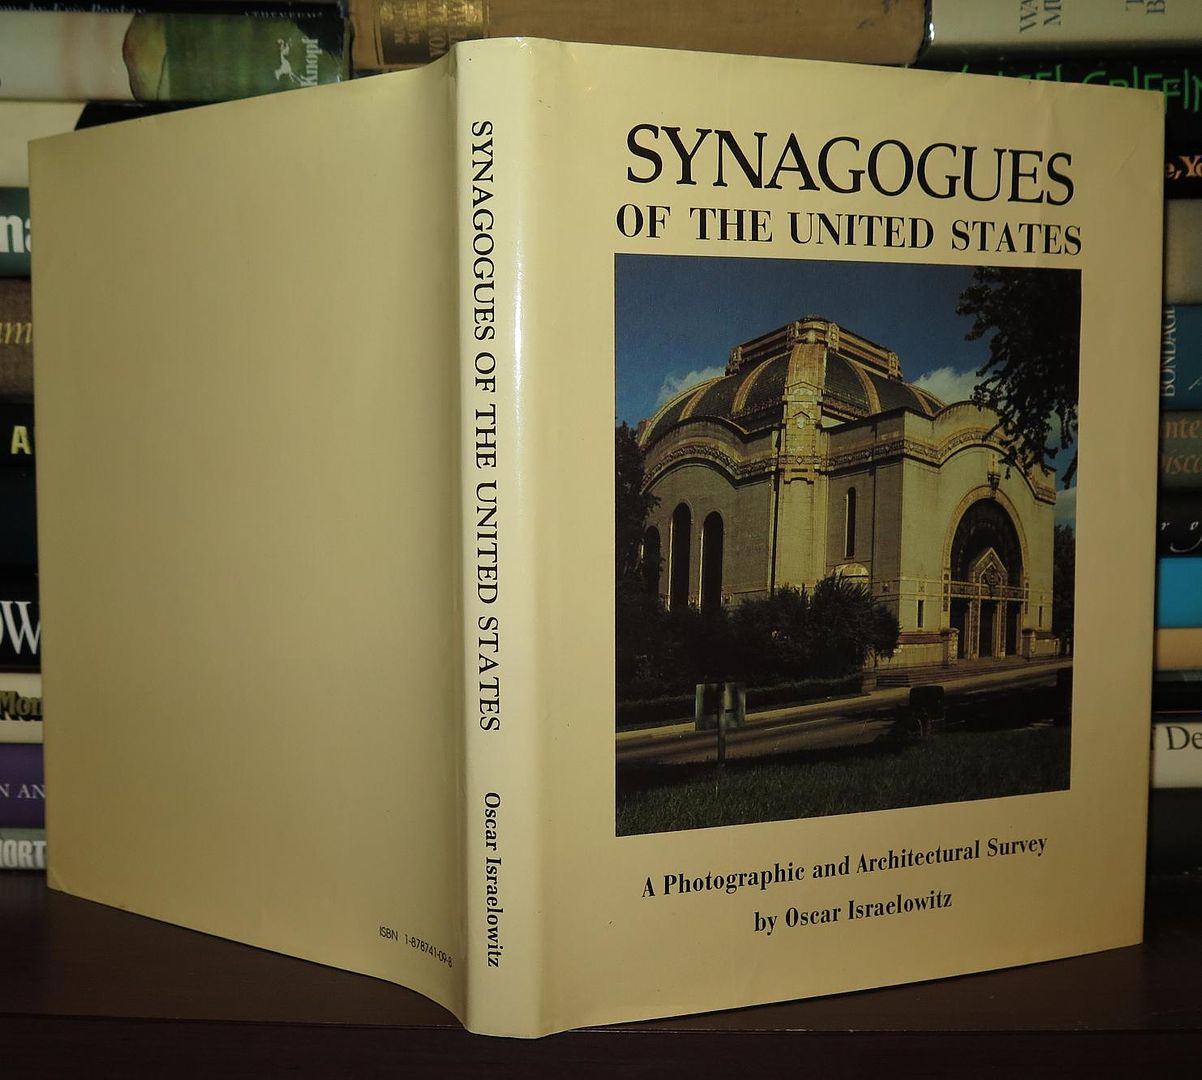 ISRAELOWITZ, OSCAR - Synagogues of the United States a Photographic and Architectural Survey